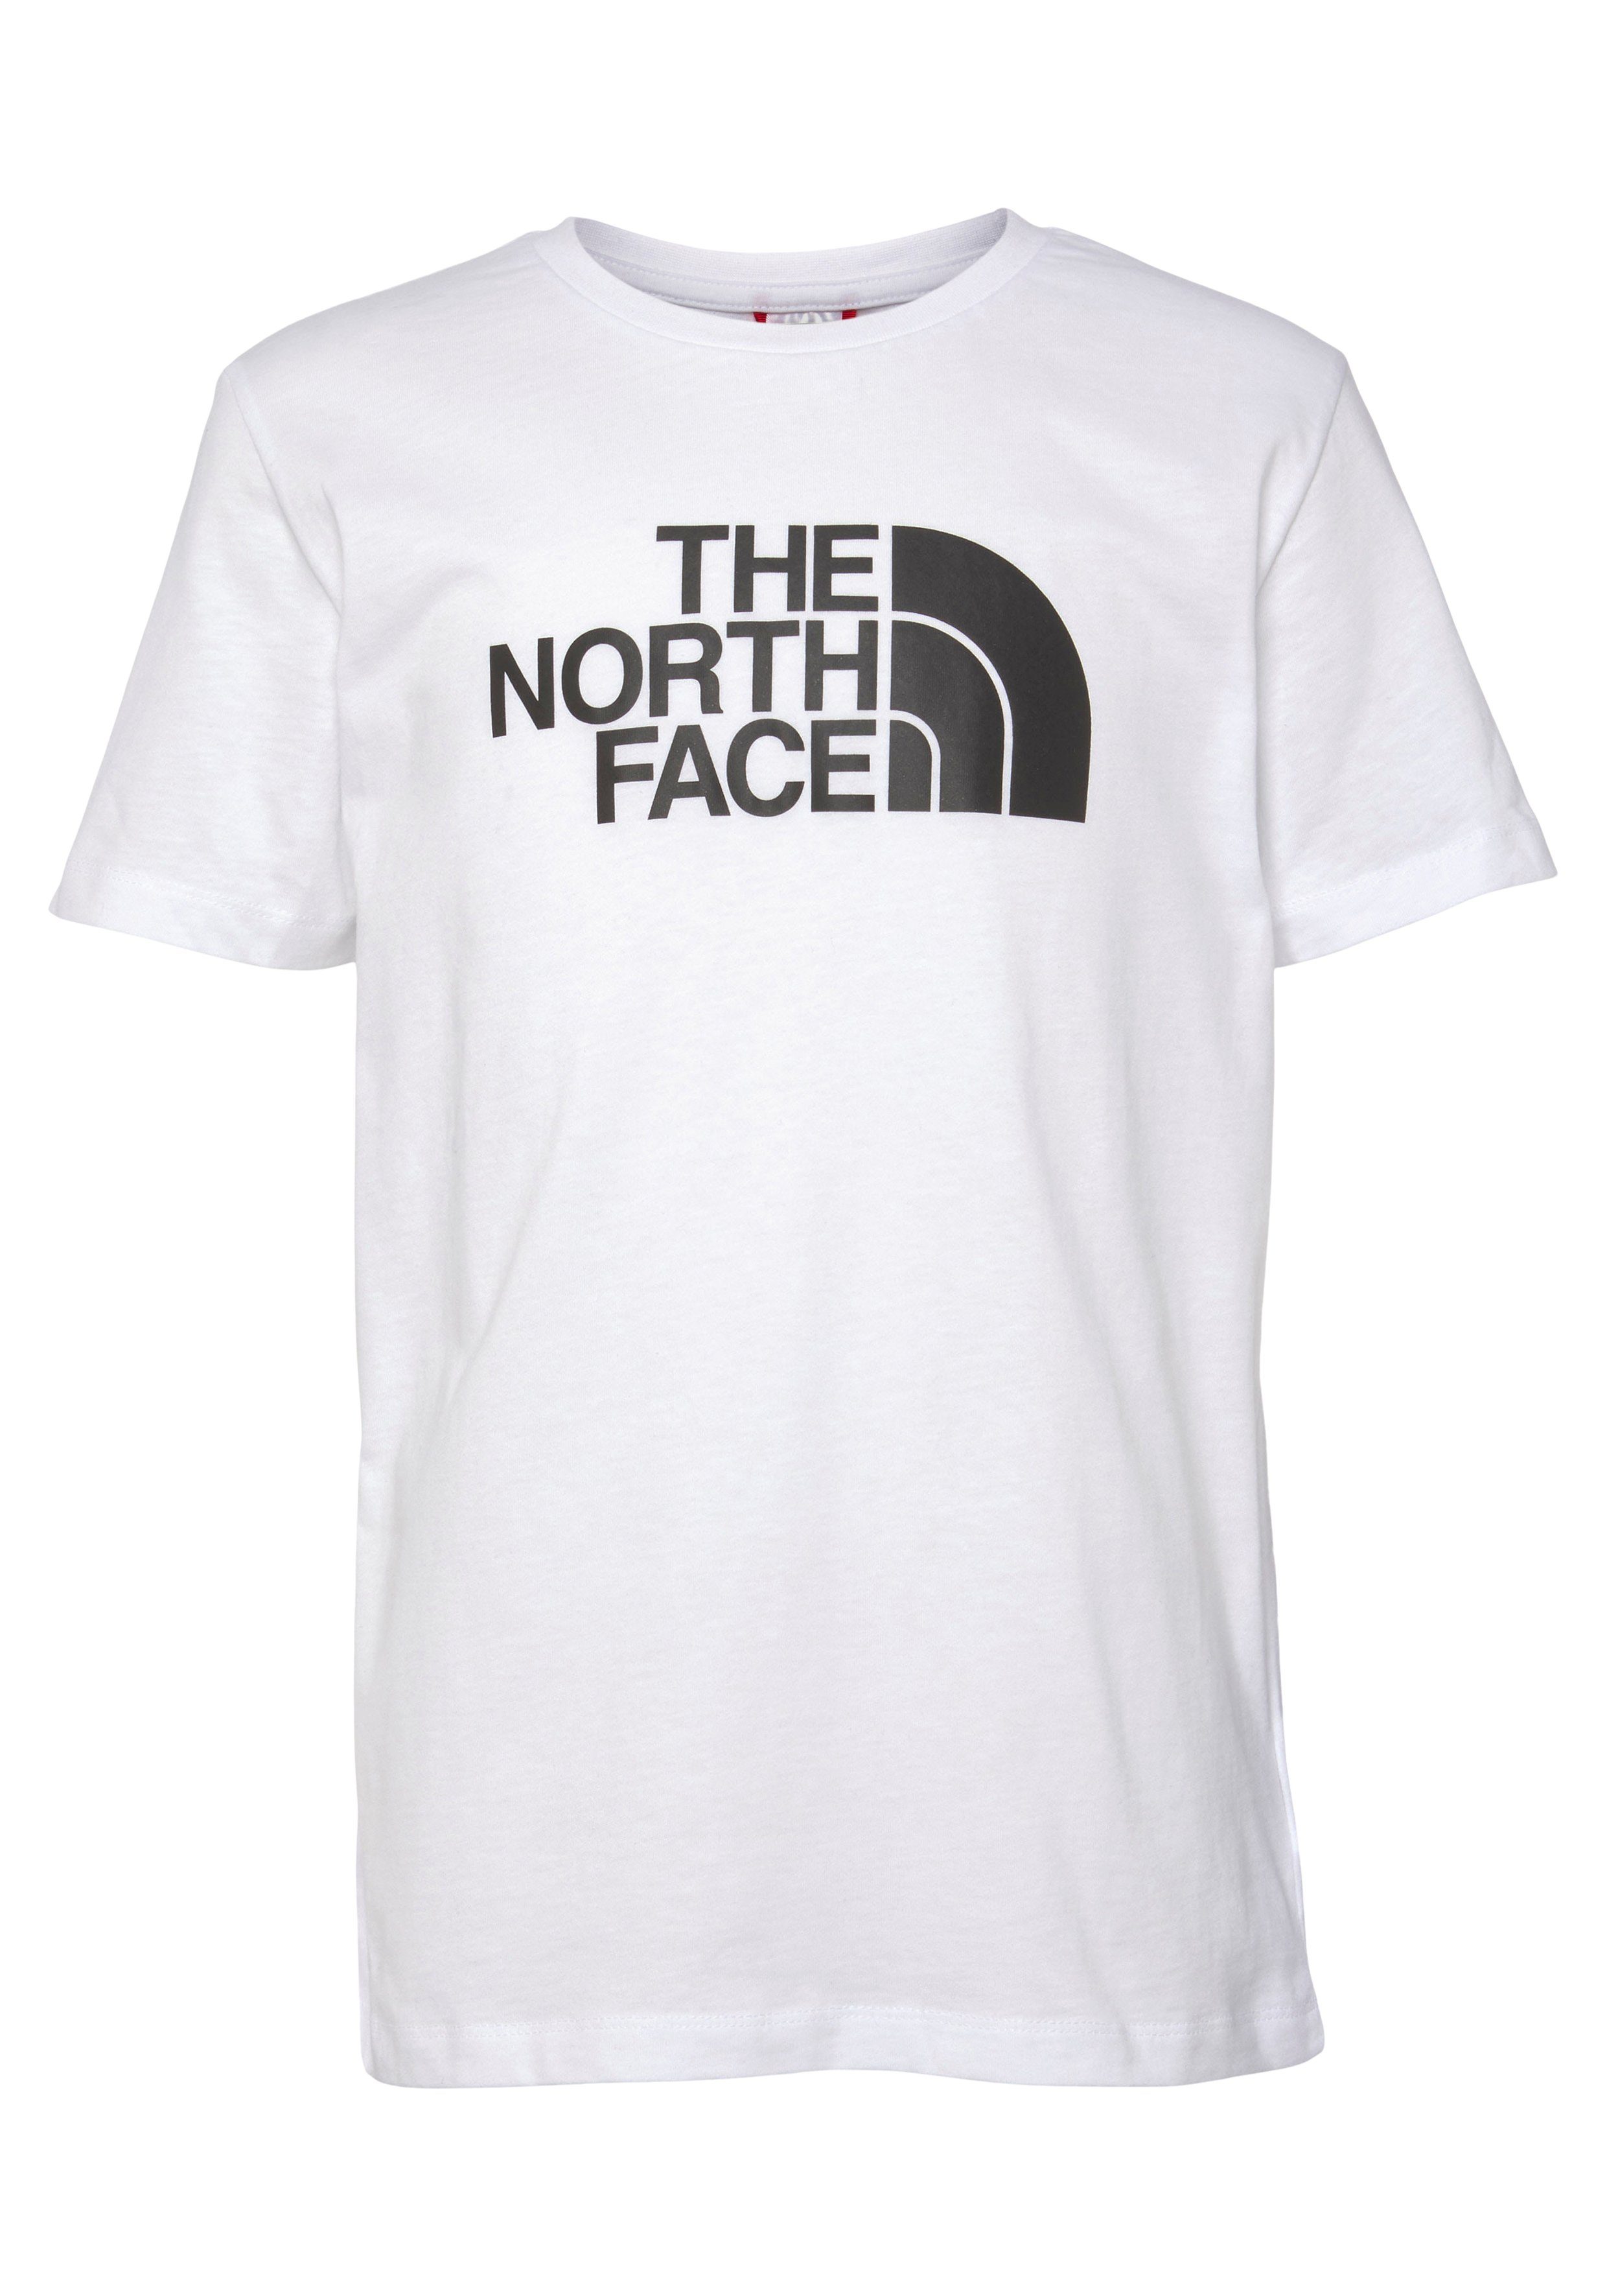 The North Face EASY white für Kinder - T-Shirt TEE